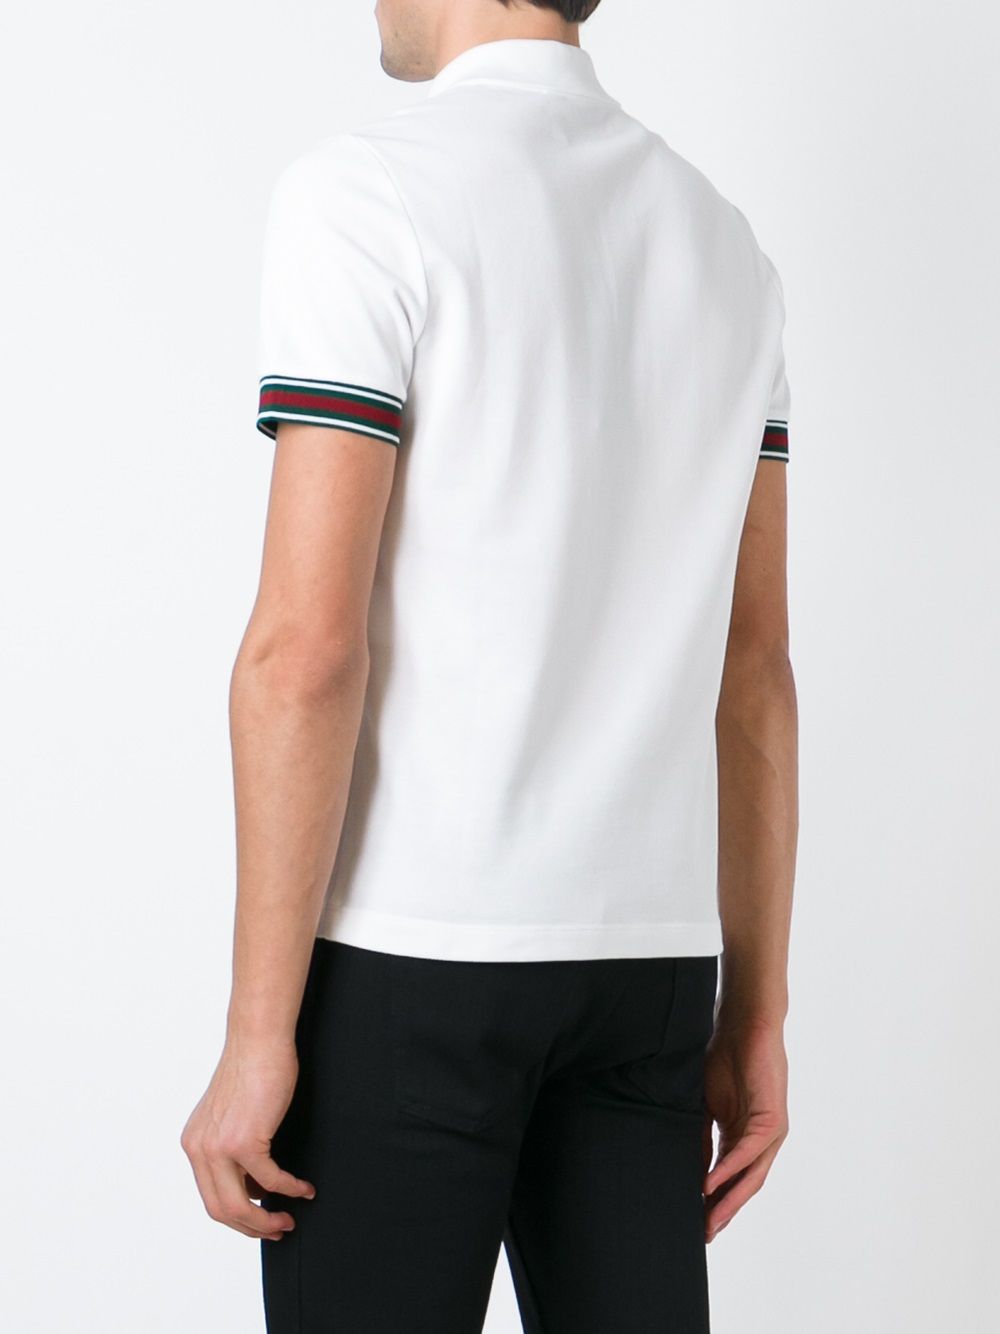 Lyst - Gucci Short Sleeves Polo Shirt in White for Men